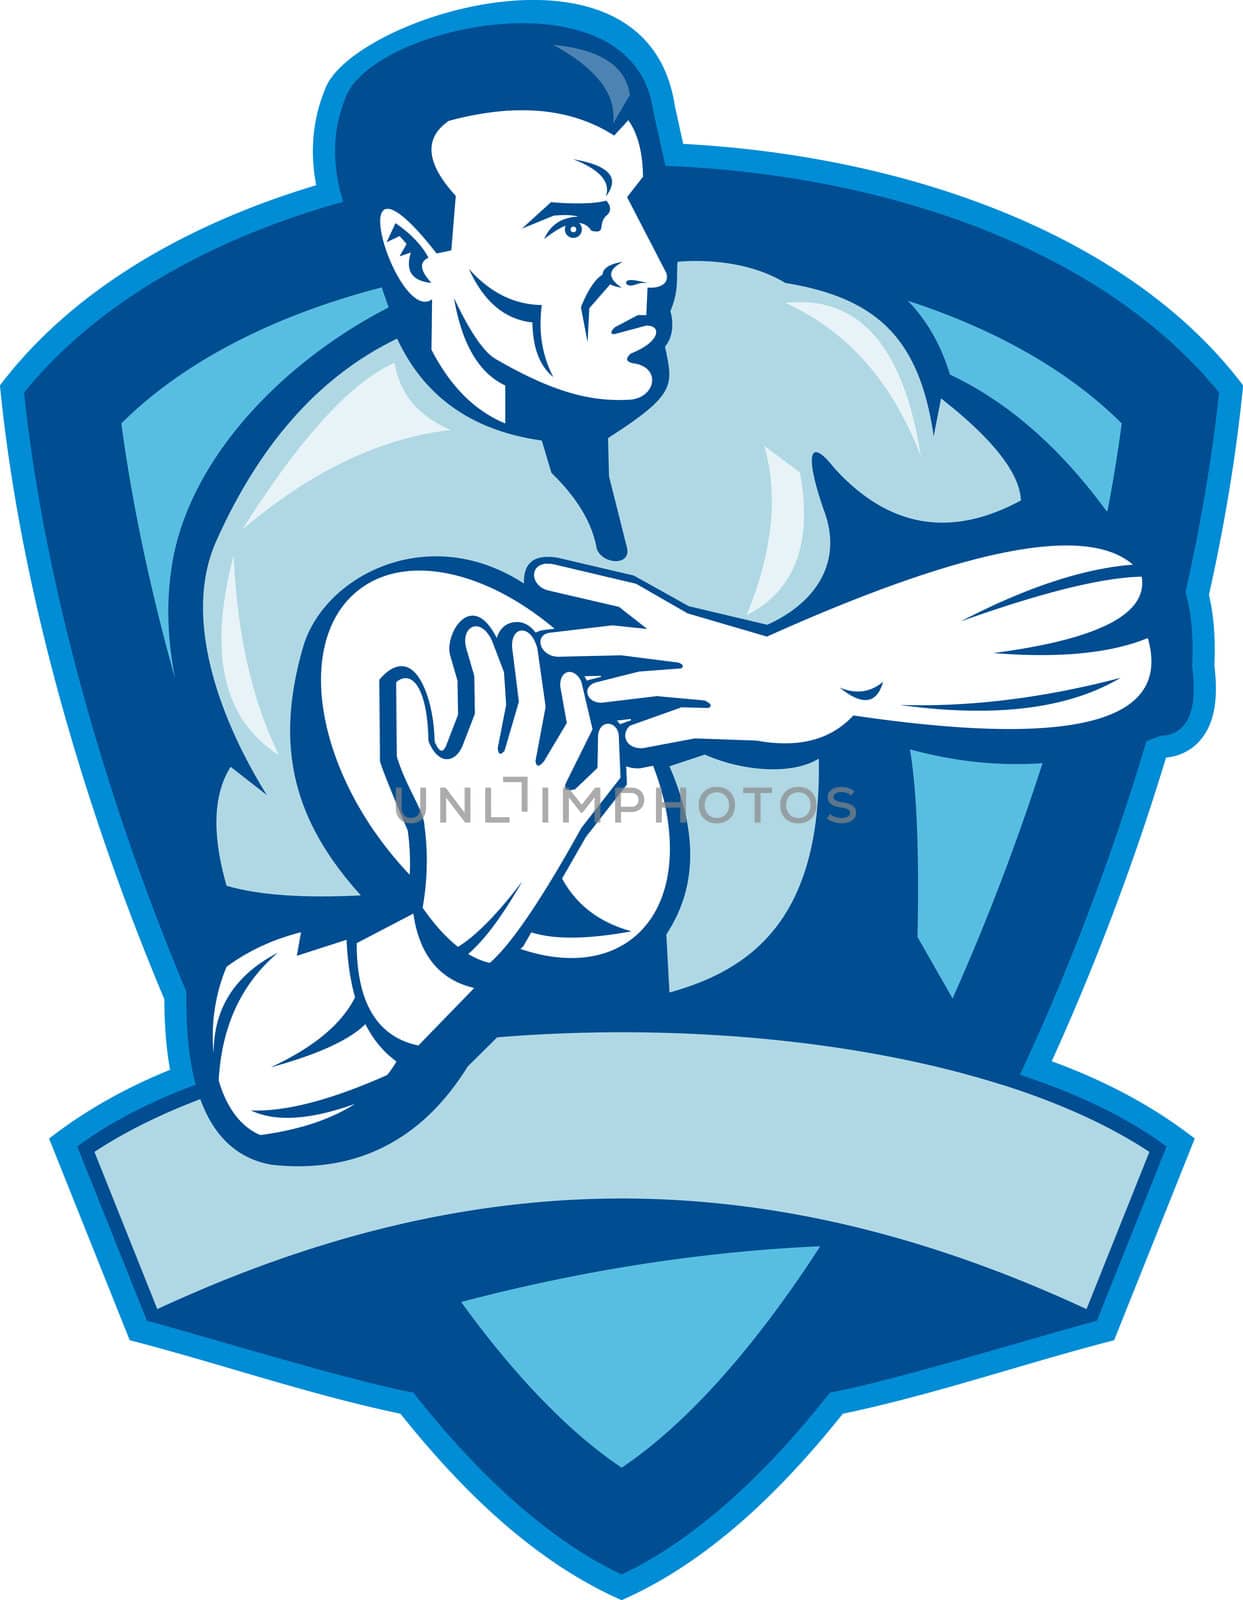 illustration of a Rugby player running with ball with shield in the background